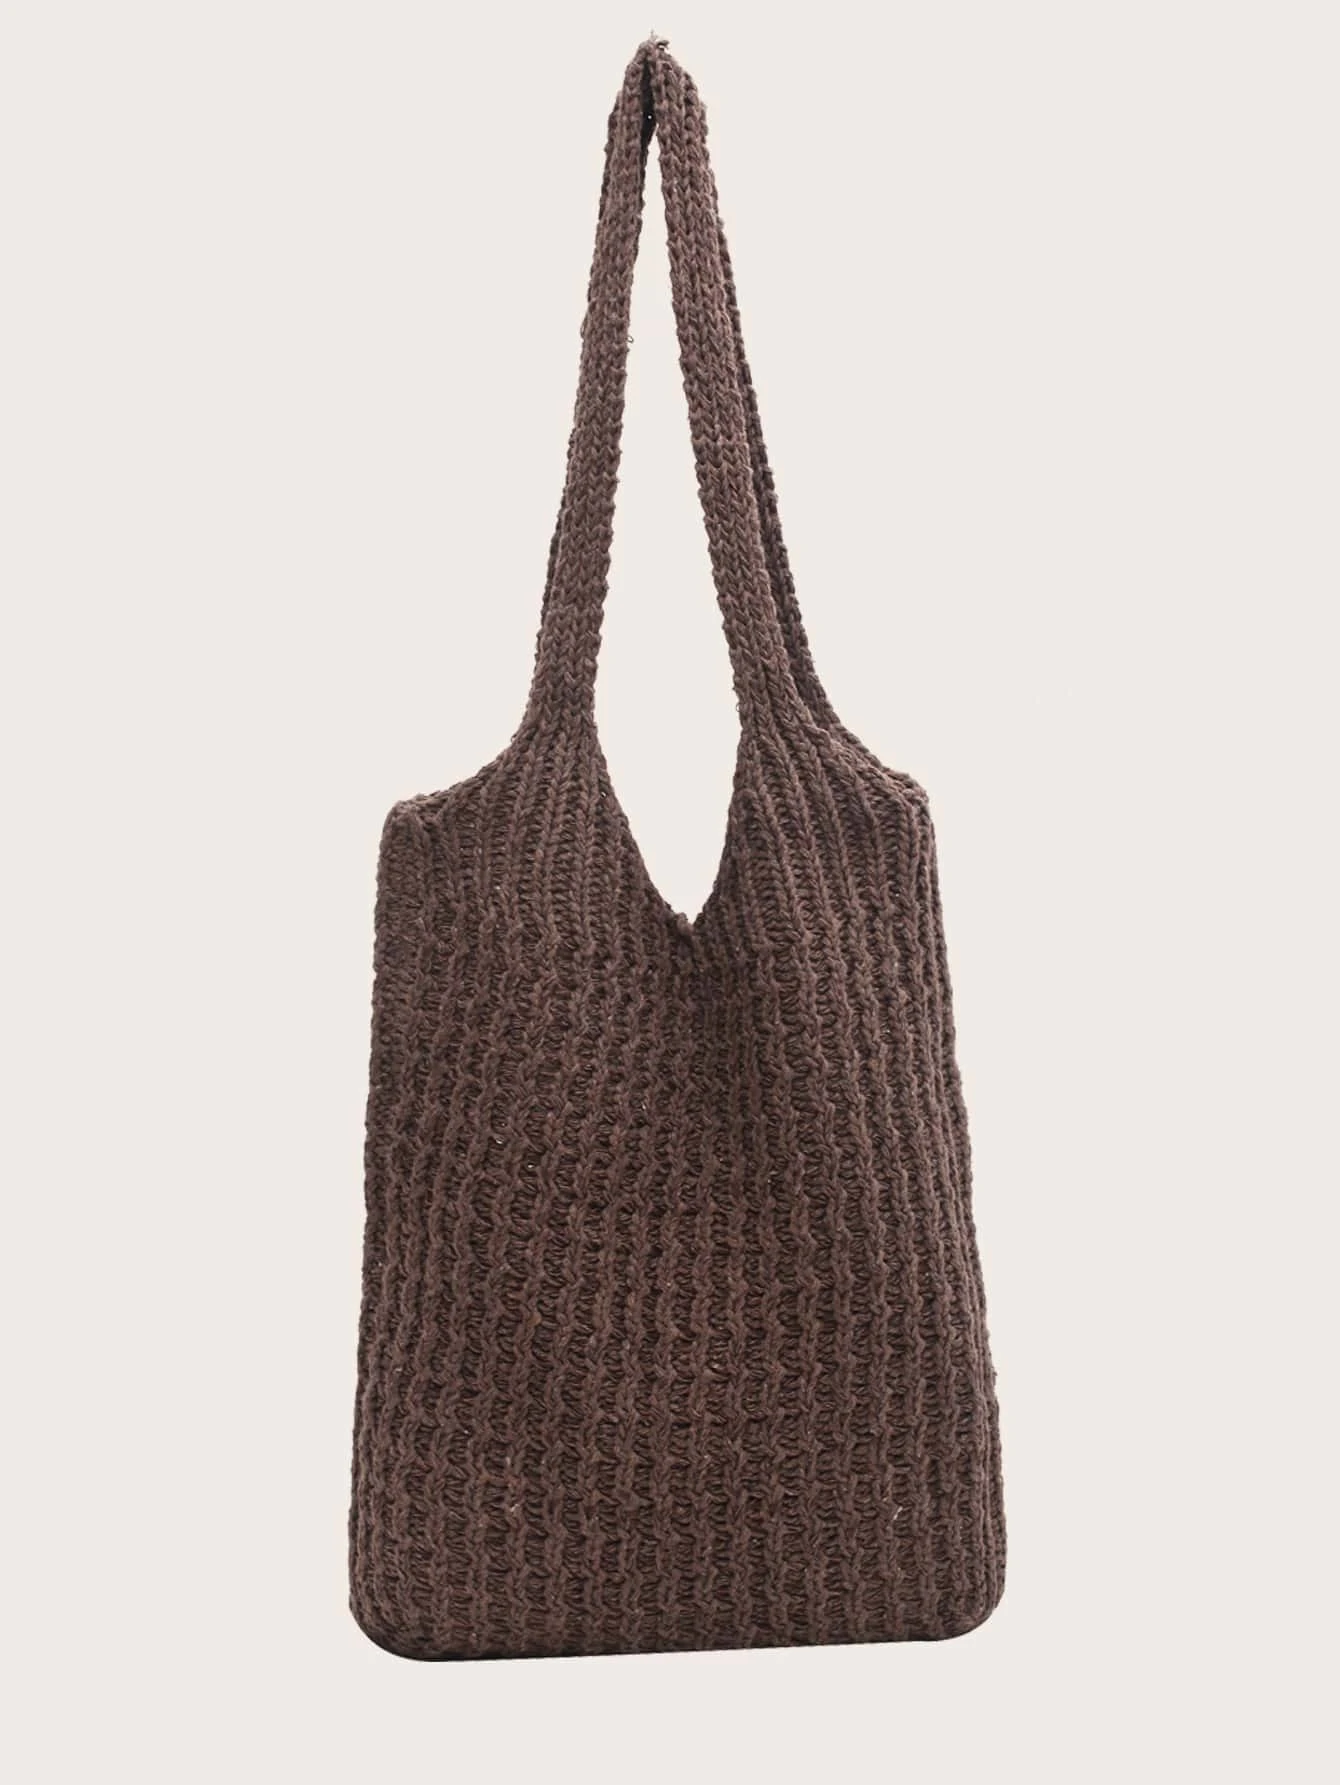 10 Creative Ways to Customize Your Knitted Tote Bag